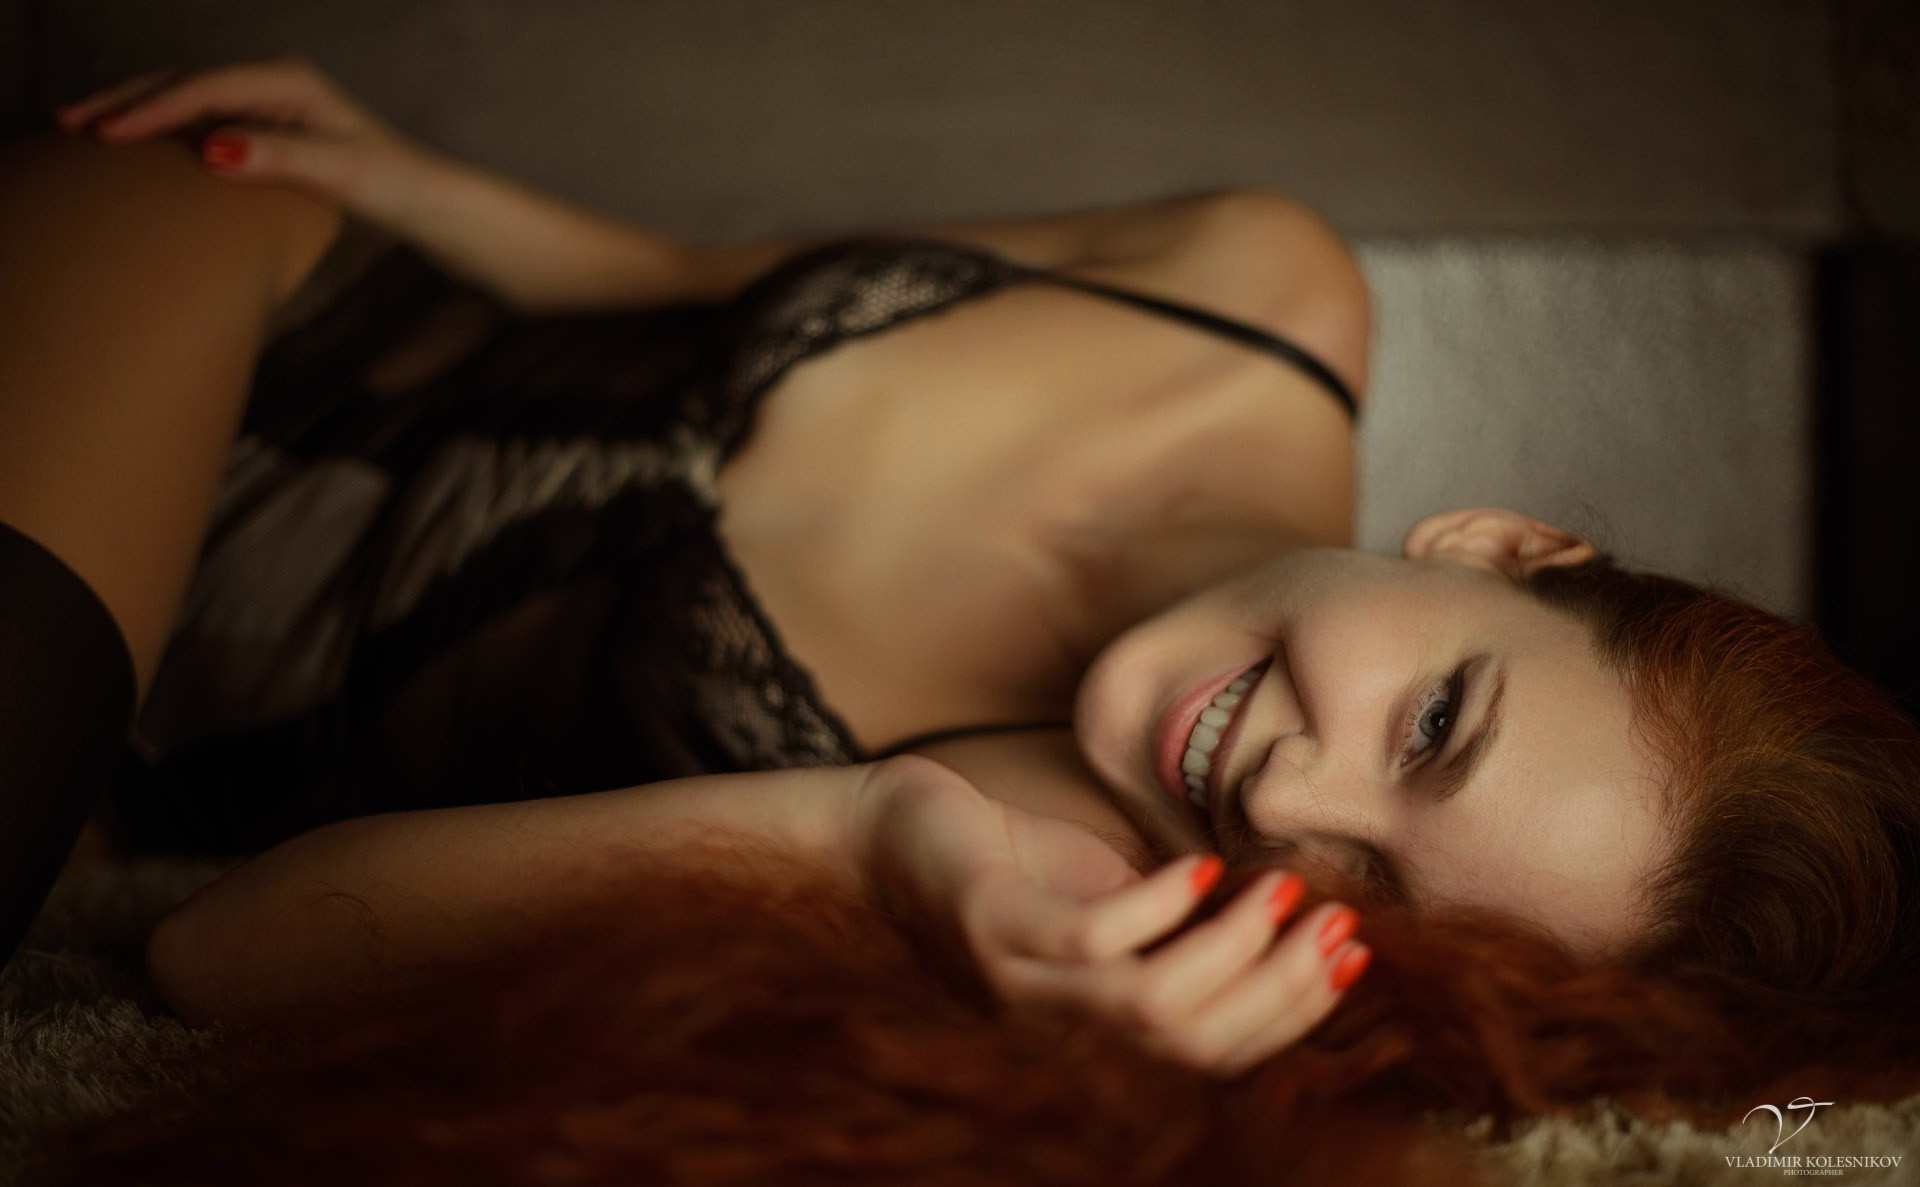 People 1920x1187 women model redhead black lingerie stockings smiling in bed lingerie blue eyes knee-highs red nails lying on side women indoors indoors painted nails underwear black underwear